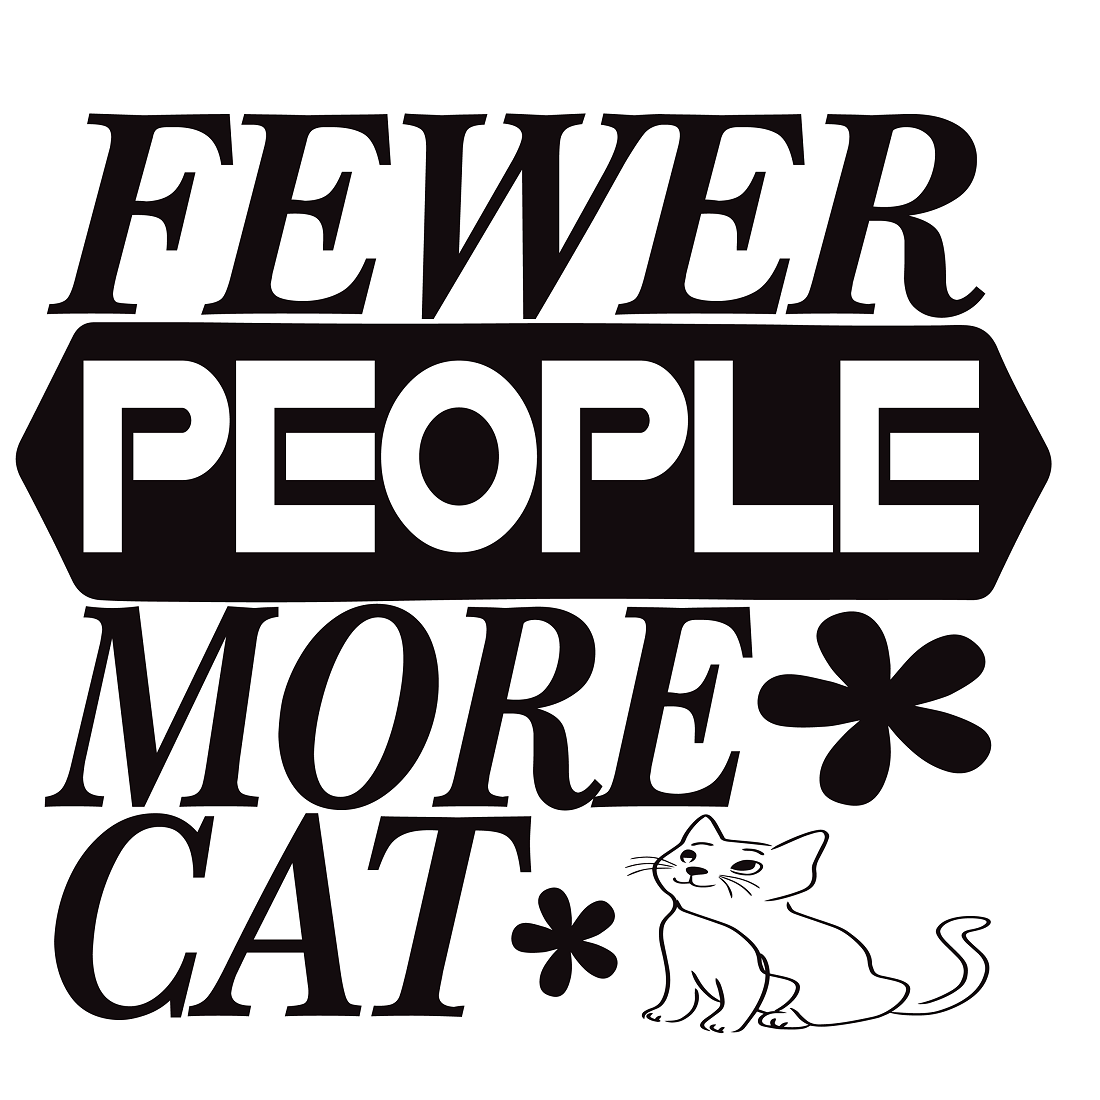 Fewer people more cat preview image.